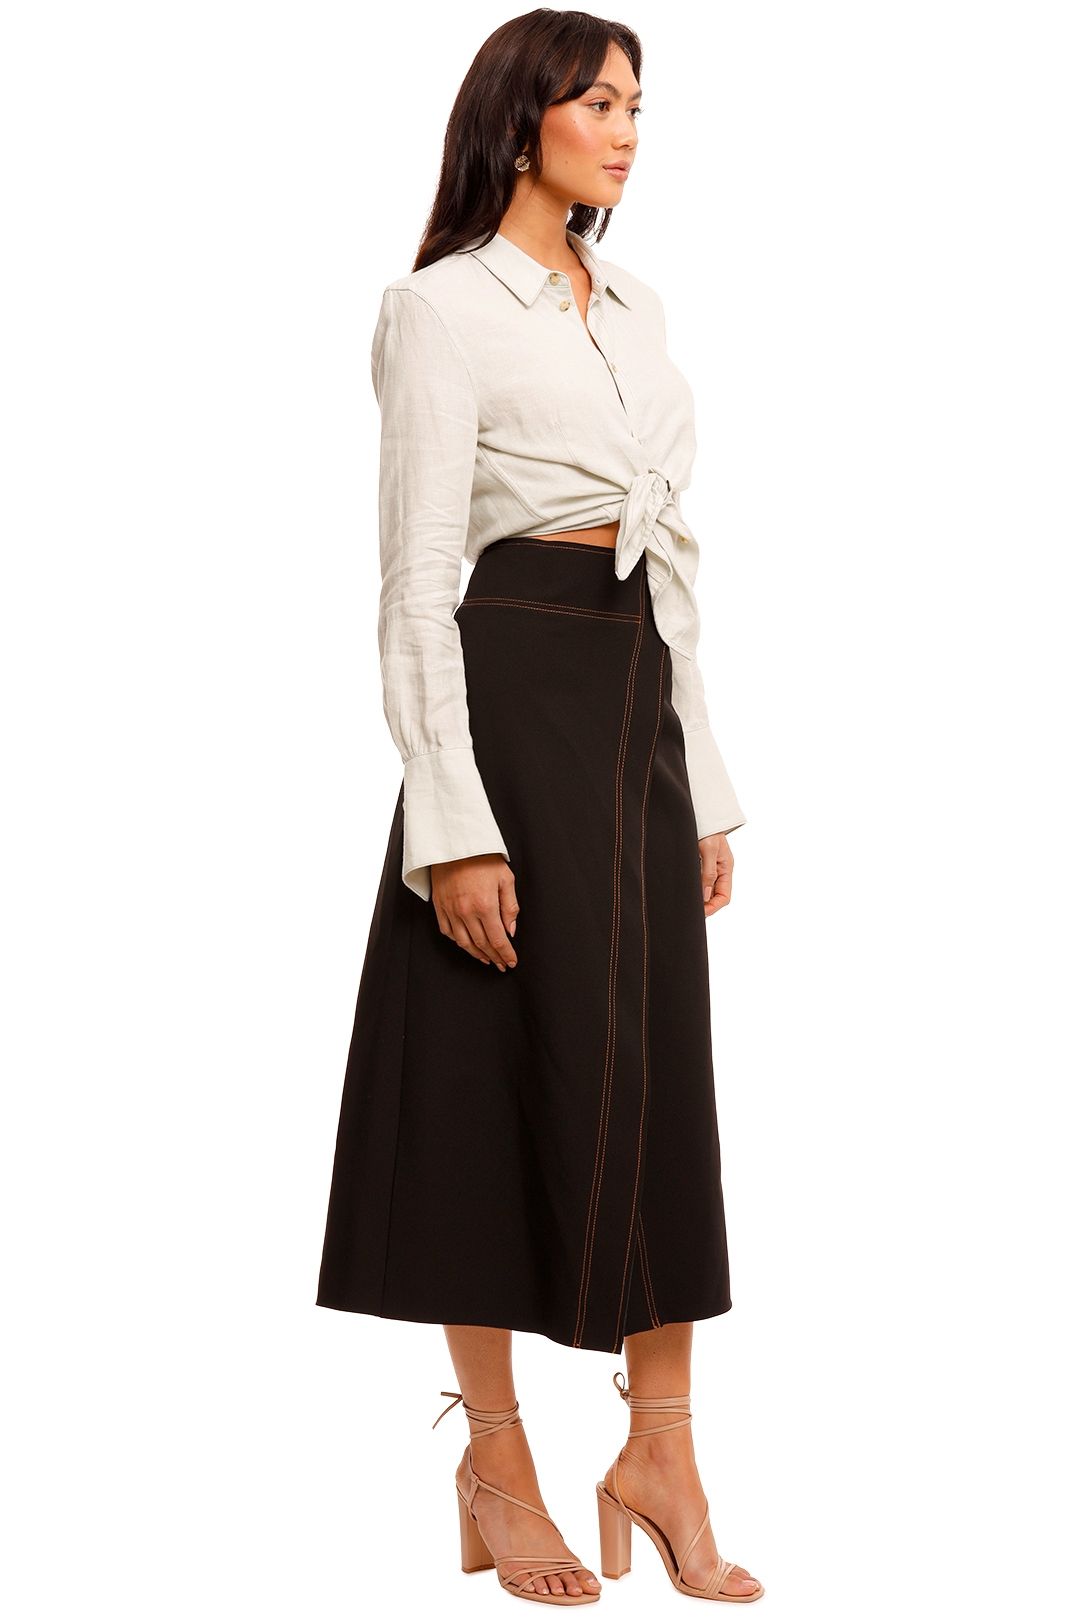 Camilla and Marc Onyx Skirt wrap